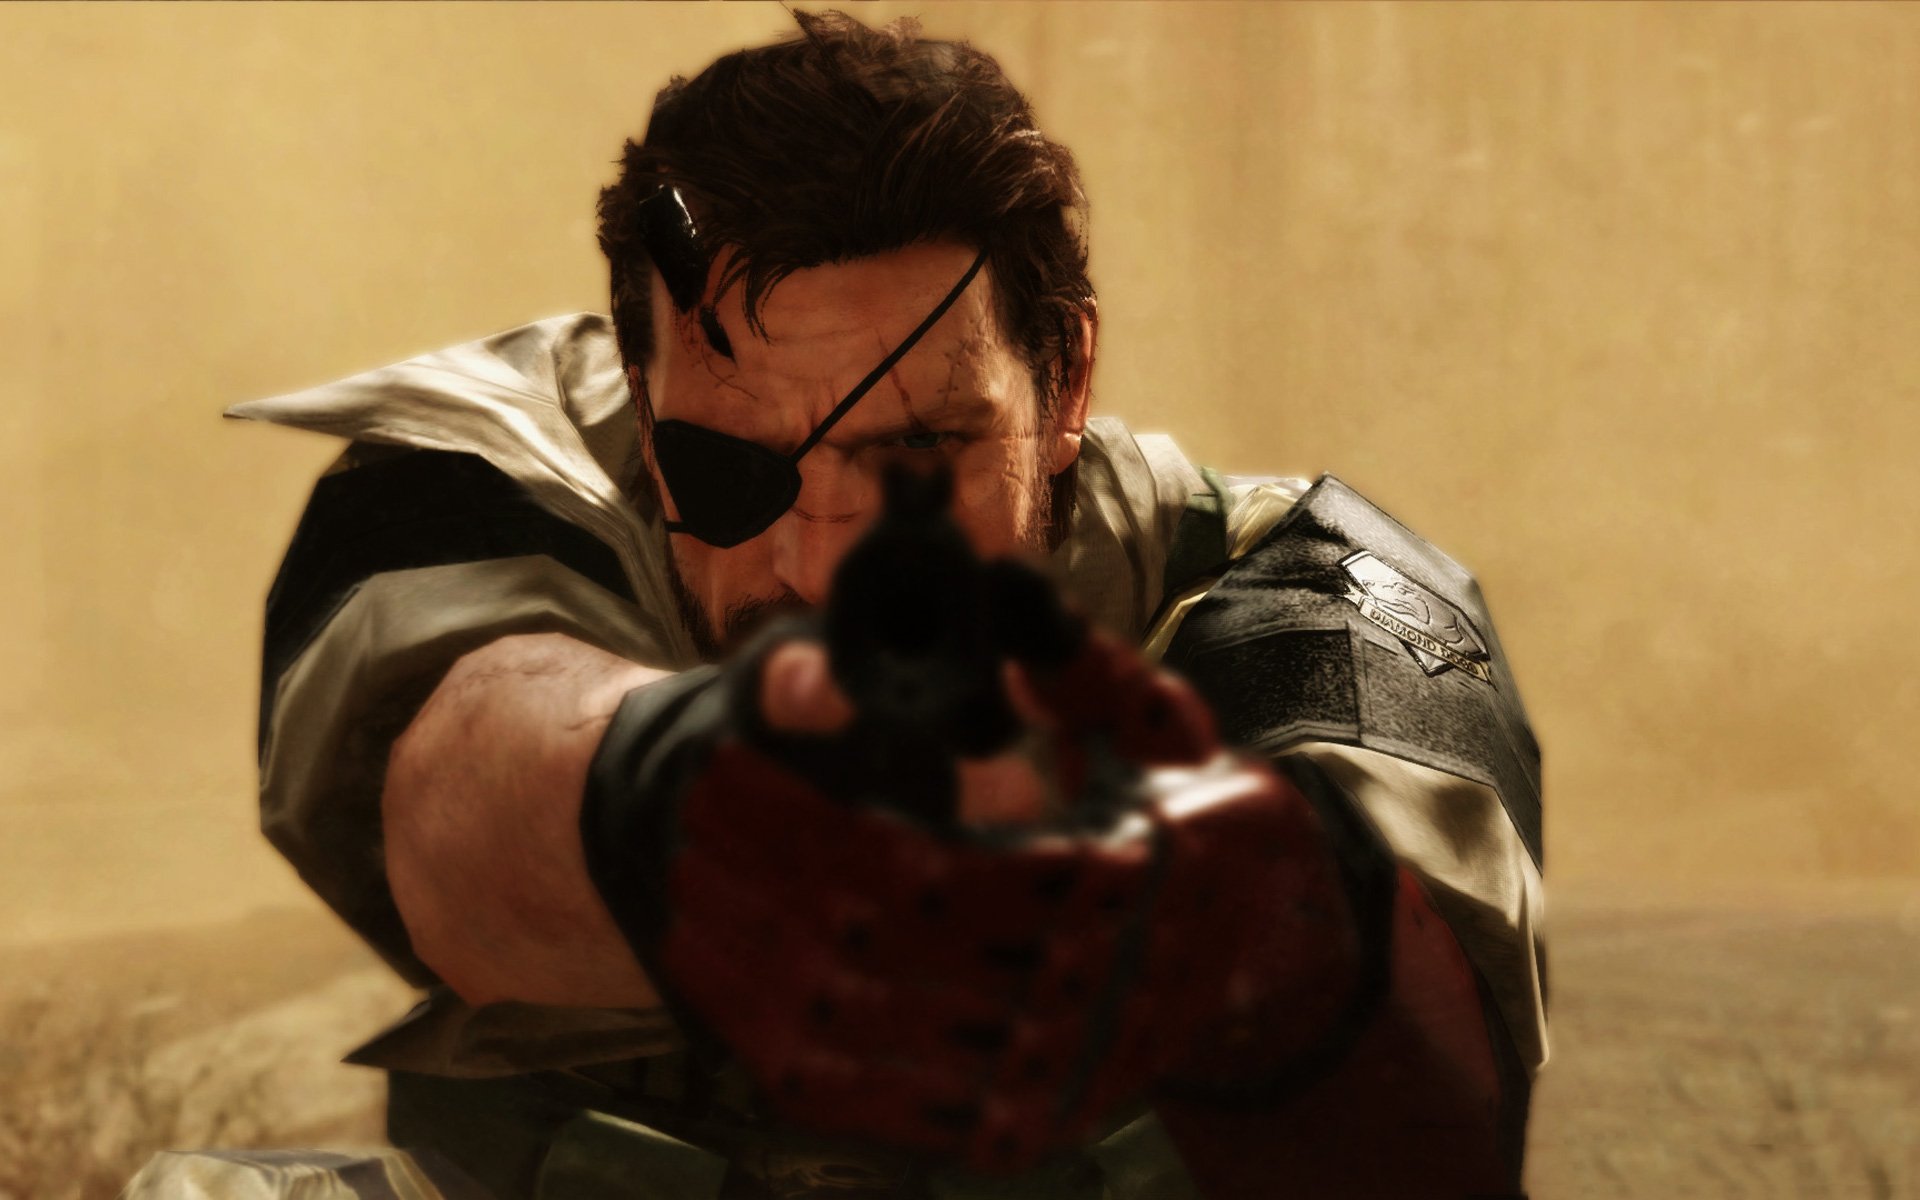 metal, Gear, Solid, Phantom, Pain, Shooter, Stealth, Action, Military, Fighting, Tactical, Warrior Wallpaper